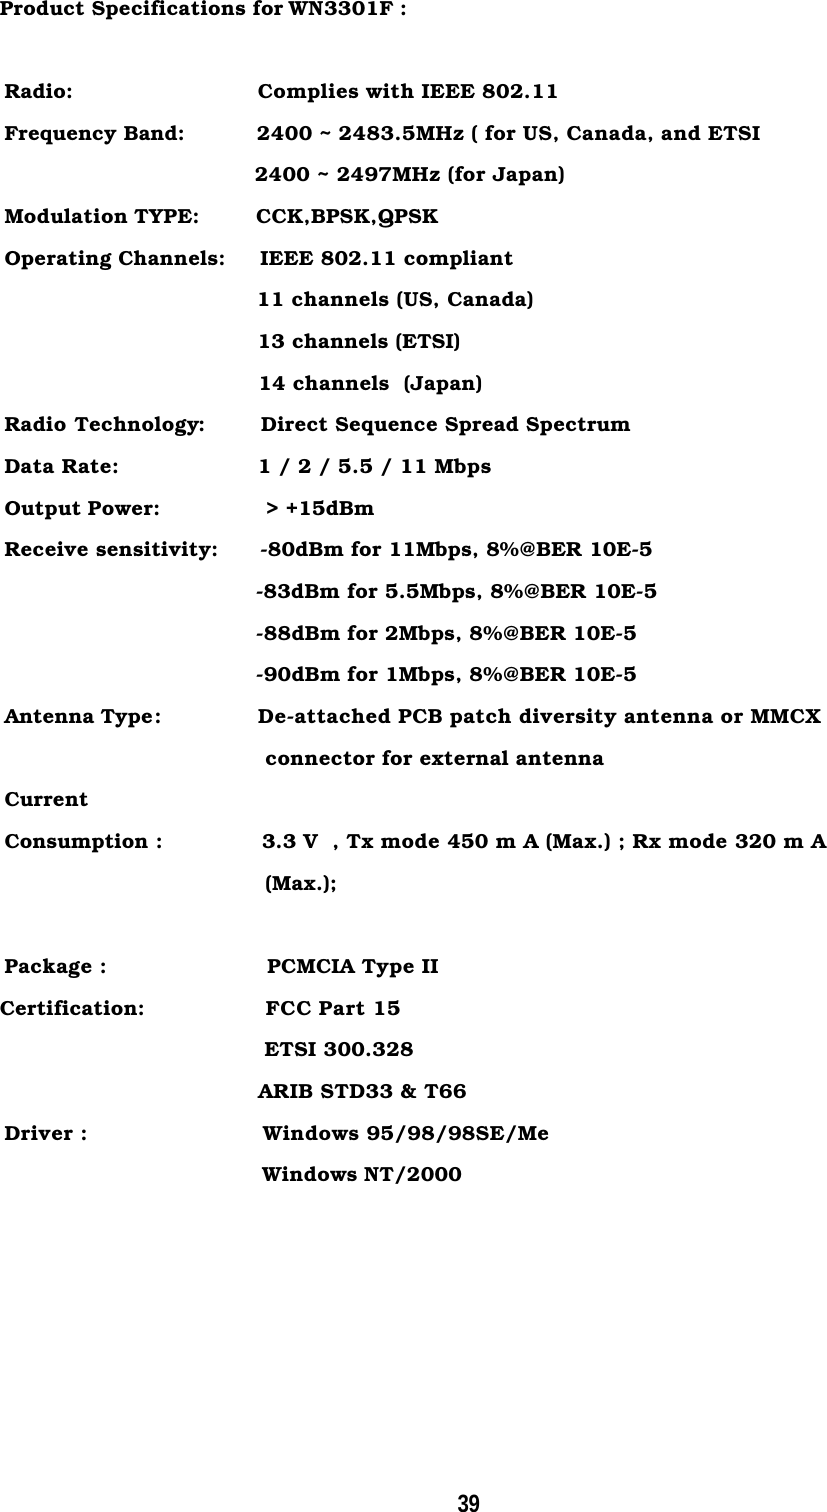 39Product Specifications for WN3301F :Radio:          Complies with IEEE 802.11Frequency Band:          2400 ~ 2483.5MHz ( for US, Canada, and ETSI                                    2400 ~ 2497MHz (for Japan)Modulation TYPE:     CCK,BPSK,QPSKOperating Channels:     IEEE 802.11 compliant                                    11 channels (US, Canada)                                    13 channels (ETSI)                                    14 channels  (Japan)Radio Technology:        Direct Sequence Spread SpectrumData Rate:          1 / 2 / 5.5 / 11 MbpsOutput Power:          &gt; +15dBmReceive sensitivity:      -80dBm for 11Mbps, 8%@BER 10E-5-83dBm for 5.5Mbps, 8%@BER 10E-5-88dBm for 2Mbps, 8%@BER 10E-5-90dBm for 1Mbps, 8%@BER 10E-5Antenna Type:              De-attached PCB patch diversity antenna or MMCX                                     connector for external antennaCurrentConsumption :              3.3 V  , Tx mode 450 m A (Max.) ; Rx mode 320 m A                                     (Max.);Package :                       PCMCIA Type II   Certification:          FCC Part 15                                     ETSI 300.328                                    ARIB STD33 &amp; T66Driver :                         Windows 95/98/98SE/MeWindows NT/2000                                       